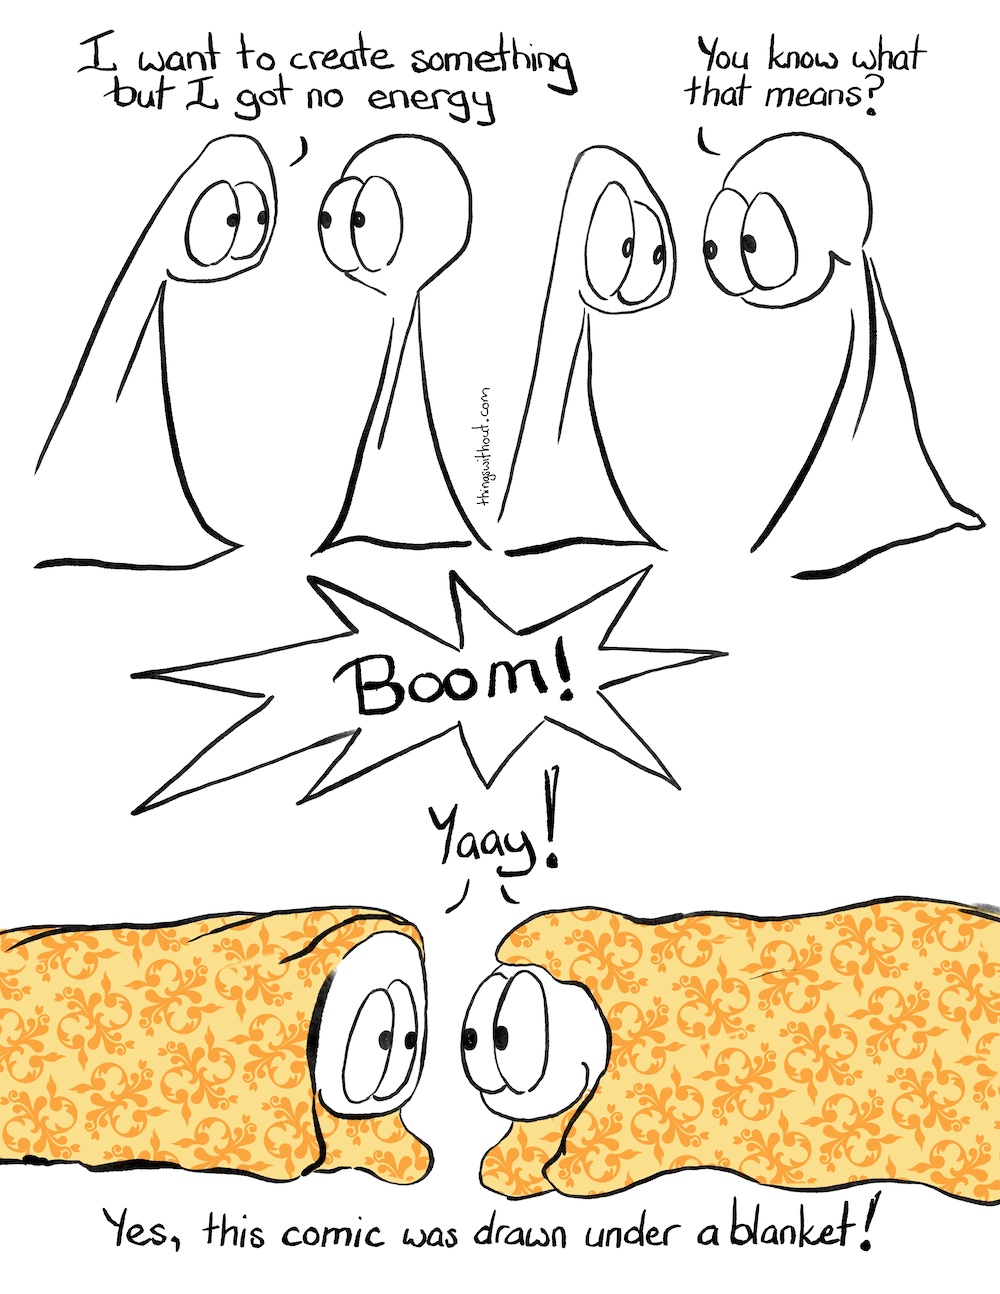 Blankie Boom Comic Transcript. The Things are talking to each other. Thing 1: I want to create something, but I got no energy. Thing 2: You know what that means?! SFX: Boom! Thing 1 and Thing 2 are both under blankets lying down on the ground. Thing 1 and Thing 2: Yaay! Caption: Yes, this comic was drawn under a blanket.